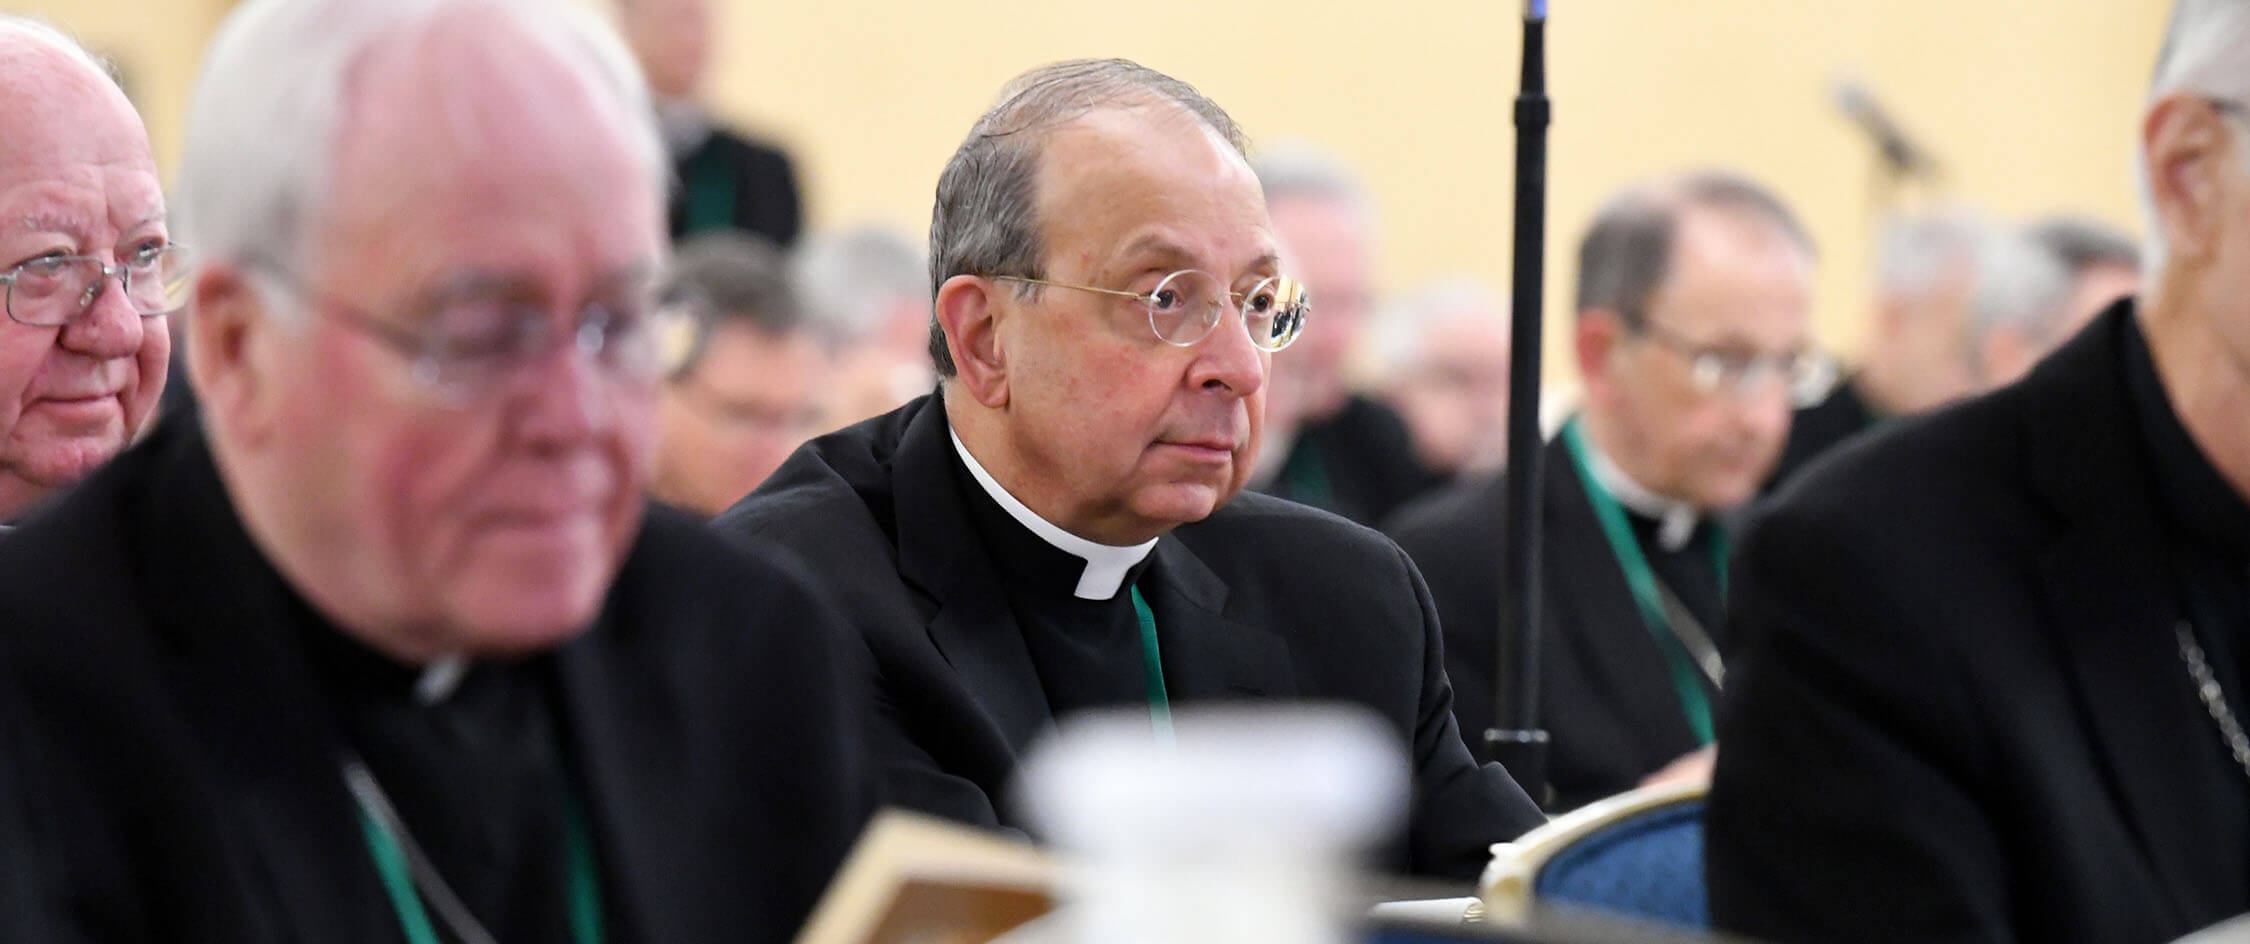 Archbishop Lori: Aspects of episcopal accountability already in place in Baltimore